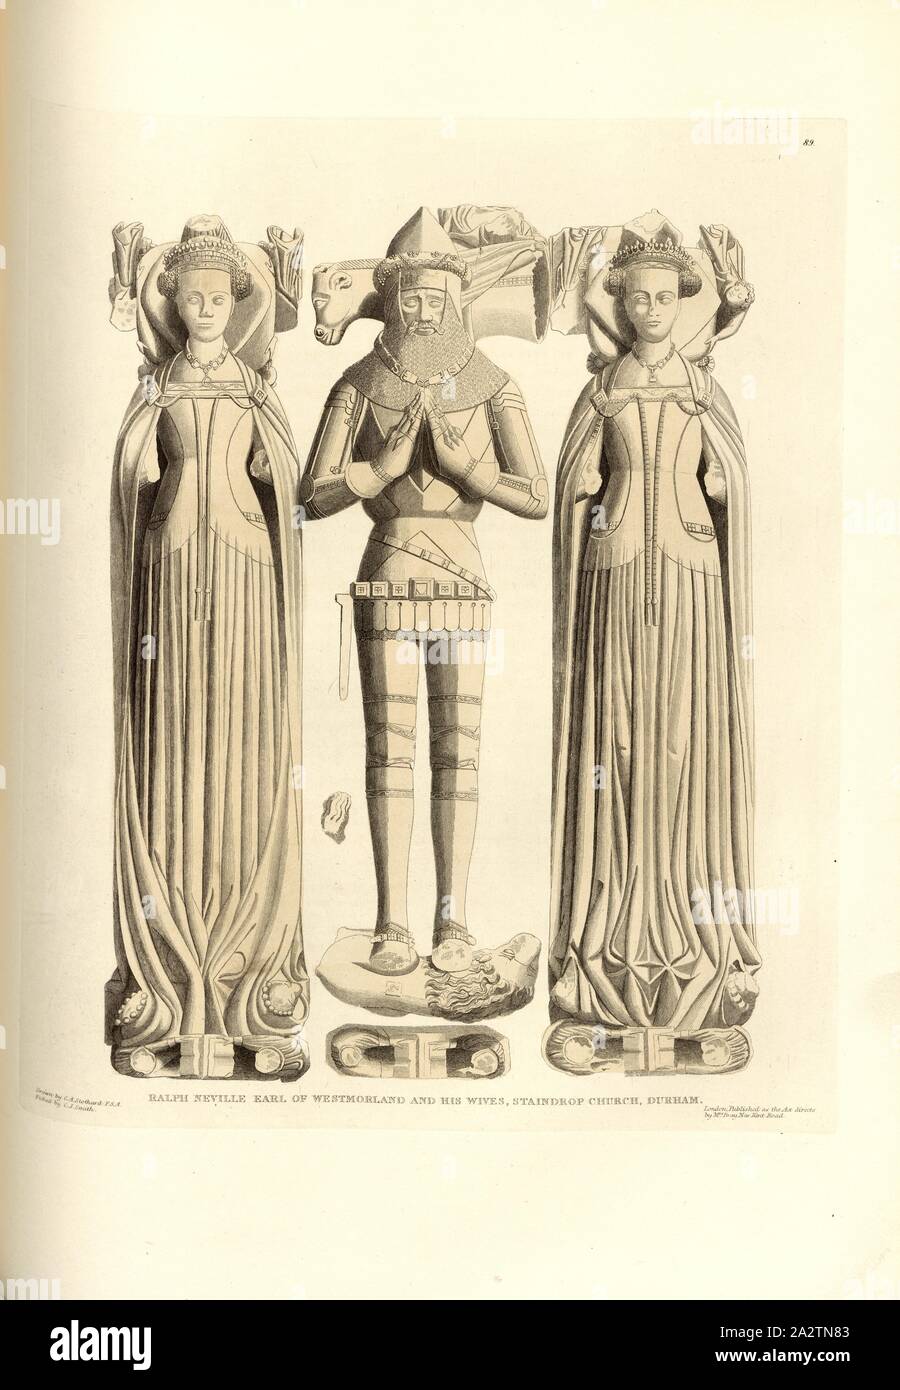 Ralph Neville Earl of Westmorland and his wives, Staindrop Church, Durham, Tomb of Ralph Neville, 1st Earl of Westmorland at St Mary's Church in Staindrop, signed: Drawn by C.A. Stothard, etched by C.J. Smith; Published by Mrs. Bray, Fig. 100, 89, after p. 68, Stothard, Charles Alfred (drawn); Smith, C. J. (etched); Bray, E. (publ.), Charles Alfred Stothard, Alfred John Kempe: The monumental effigies of Great Britain: selected from our cathedrals and churches, for the purpose of bringing together, and preserving correct representations of the best historical illustrations extant, from the Stock Photo